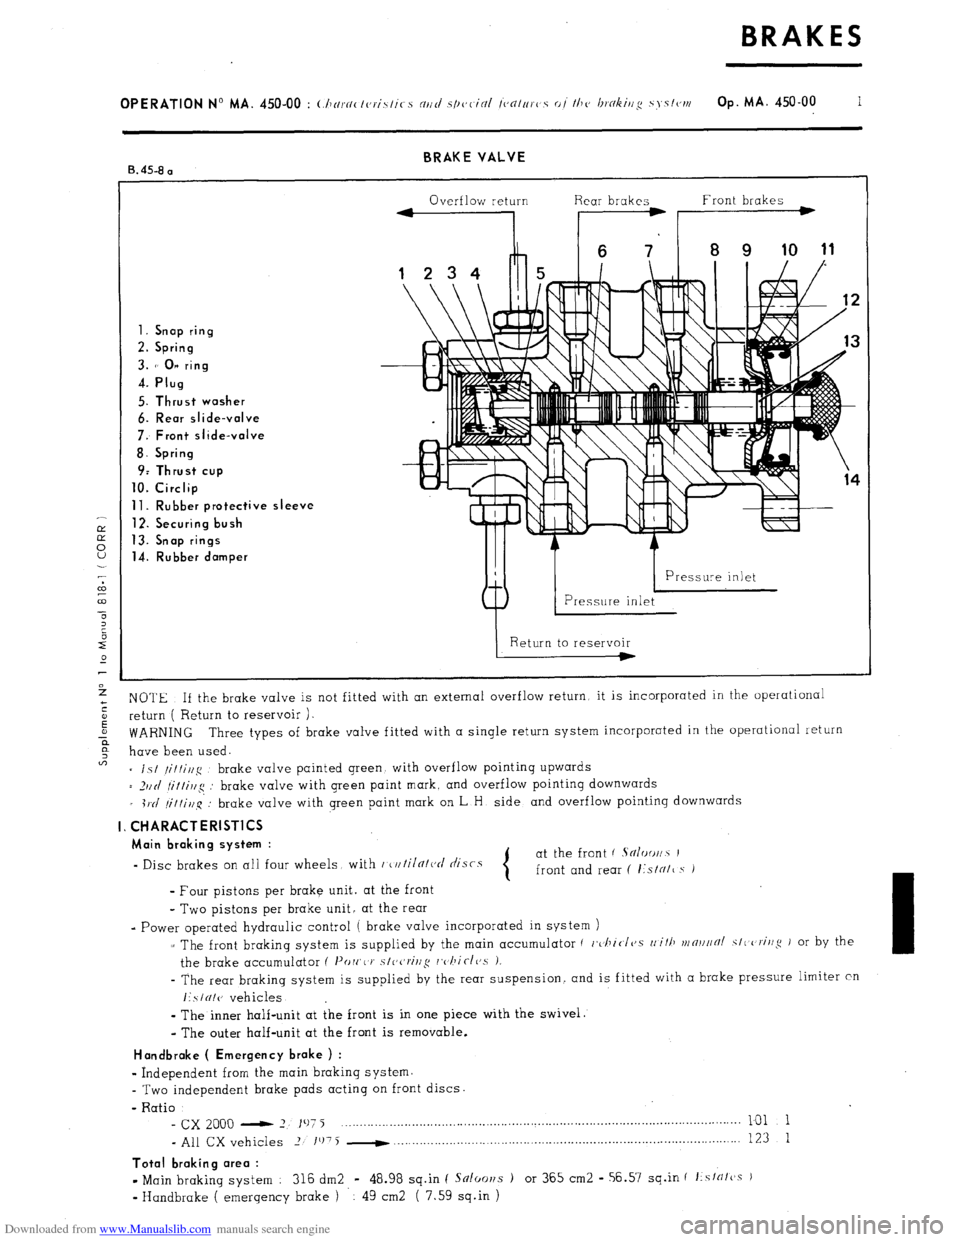 Citroen CX 1981 1.G Workshop Manual Downloaded from www.Manualslib.com manuals search engine BRAKE VALVE 
B. 45-8 a 
Overflow return Rear brakes Front brakes 
1. Snap ring 
2. Spring 
3. 1’ 0” ring 
4. Plug 
5. Thrust washer 
6. Rea